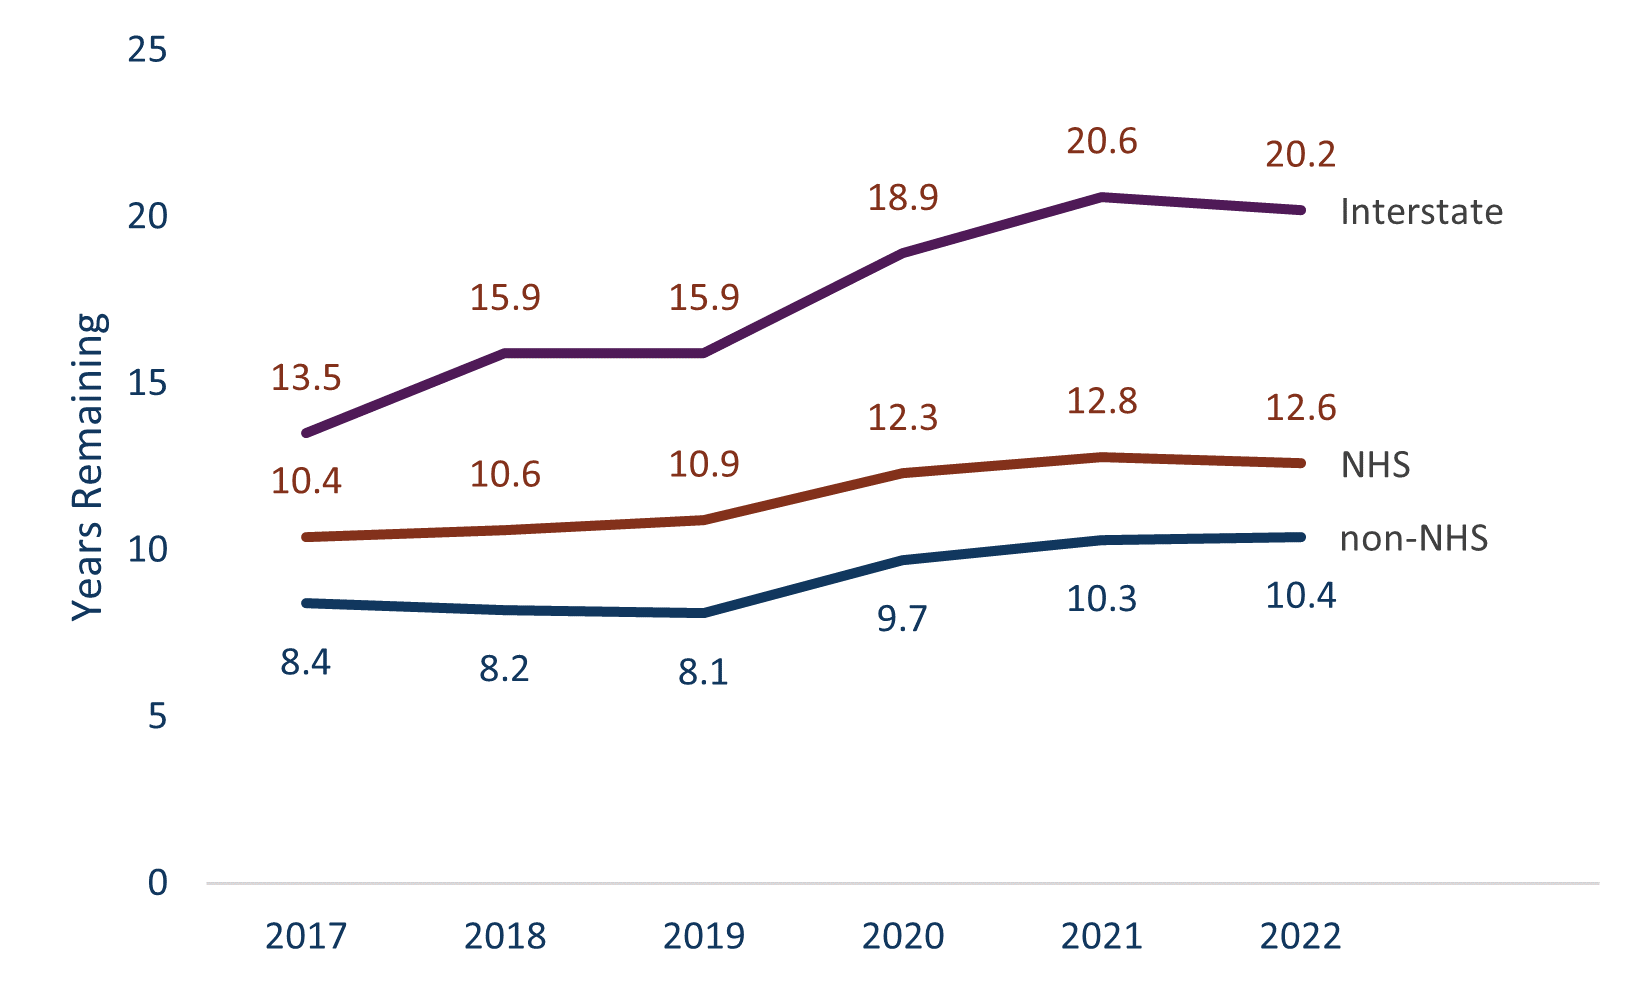 Graph showing the remaining service life for NHS, Non NHS and Interstate highways from 2017-2020